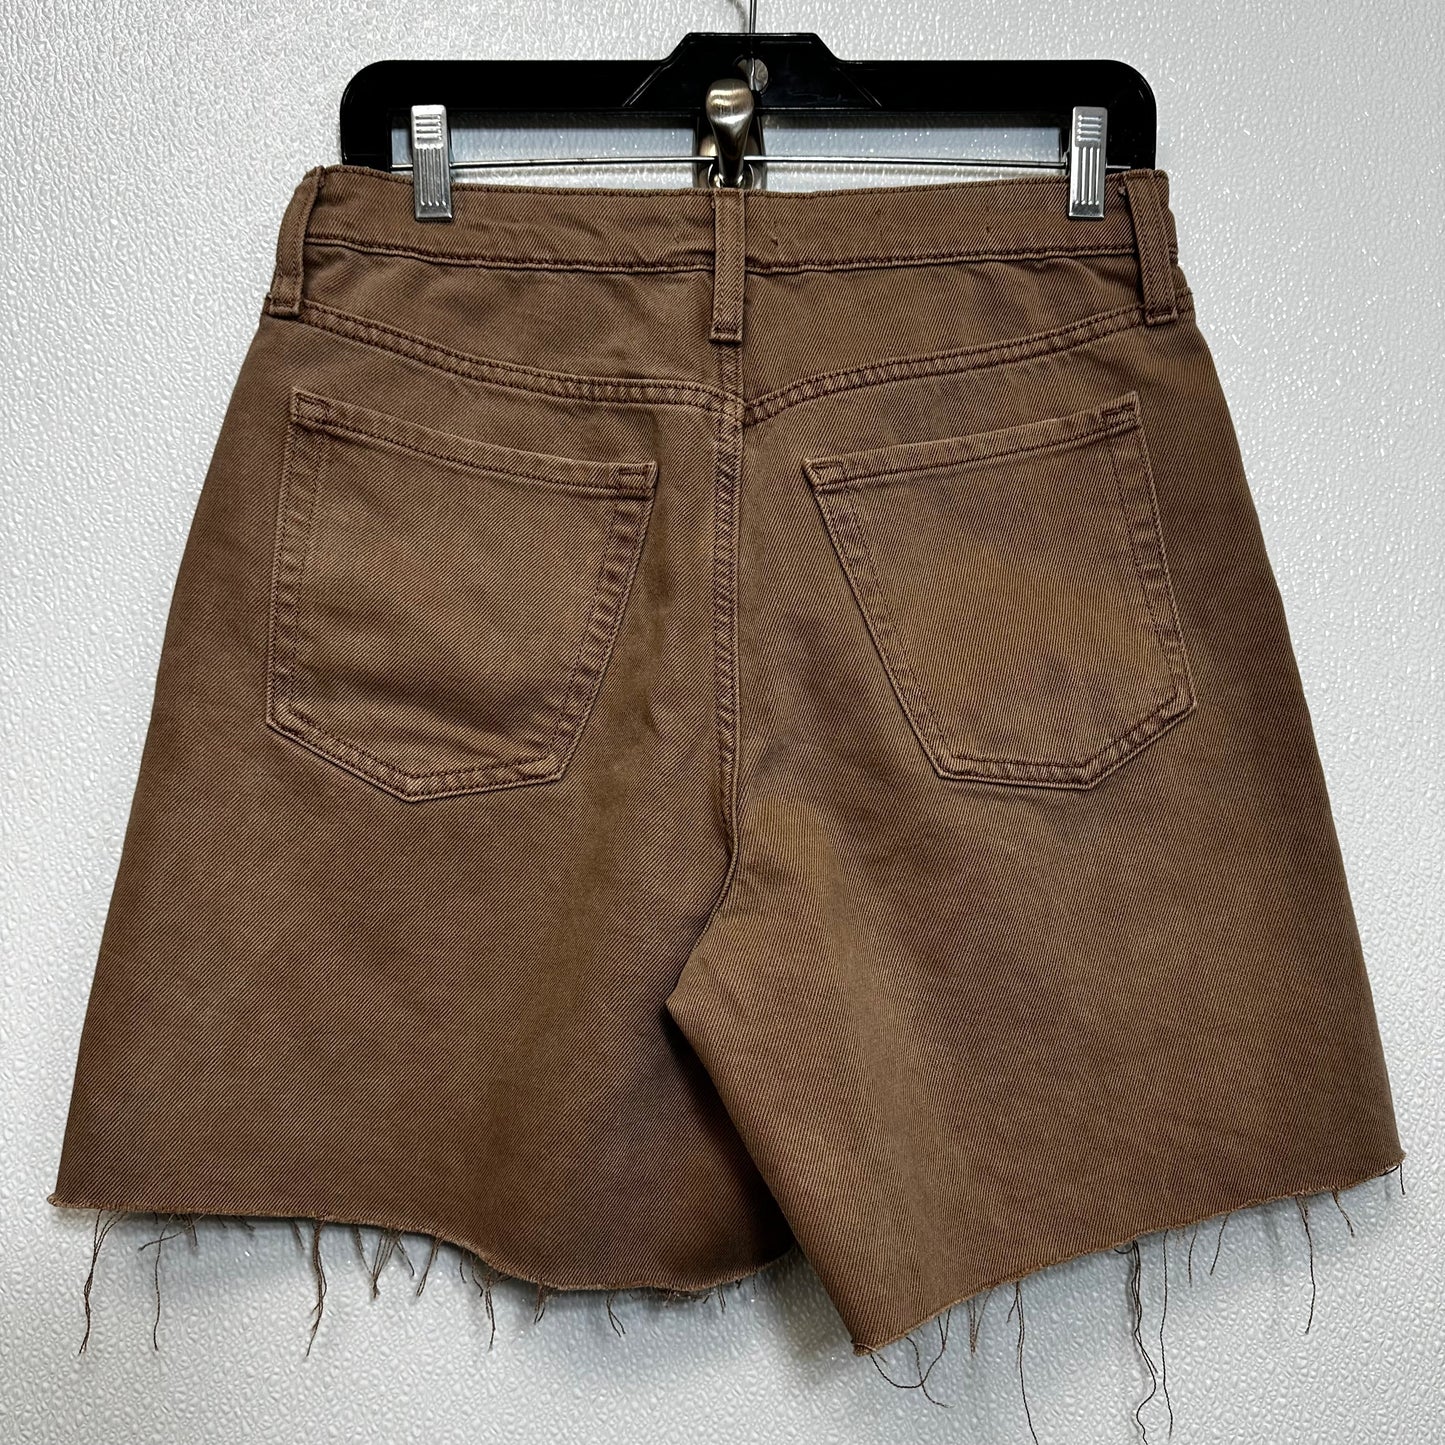 Shorts Wild Fable, Size 6